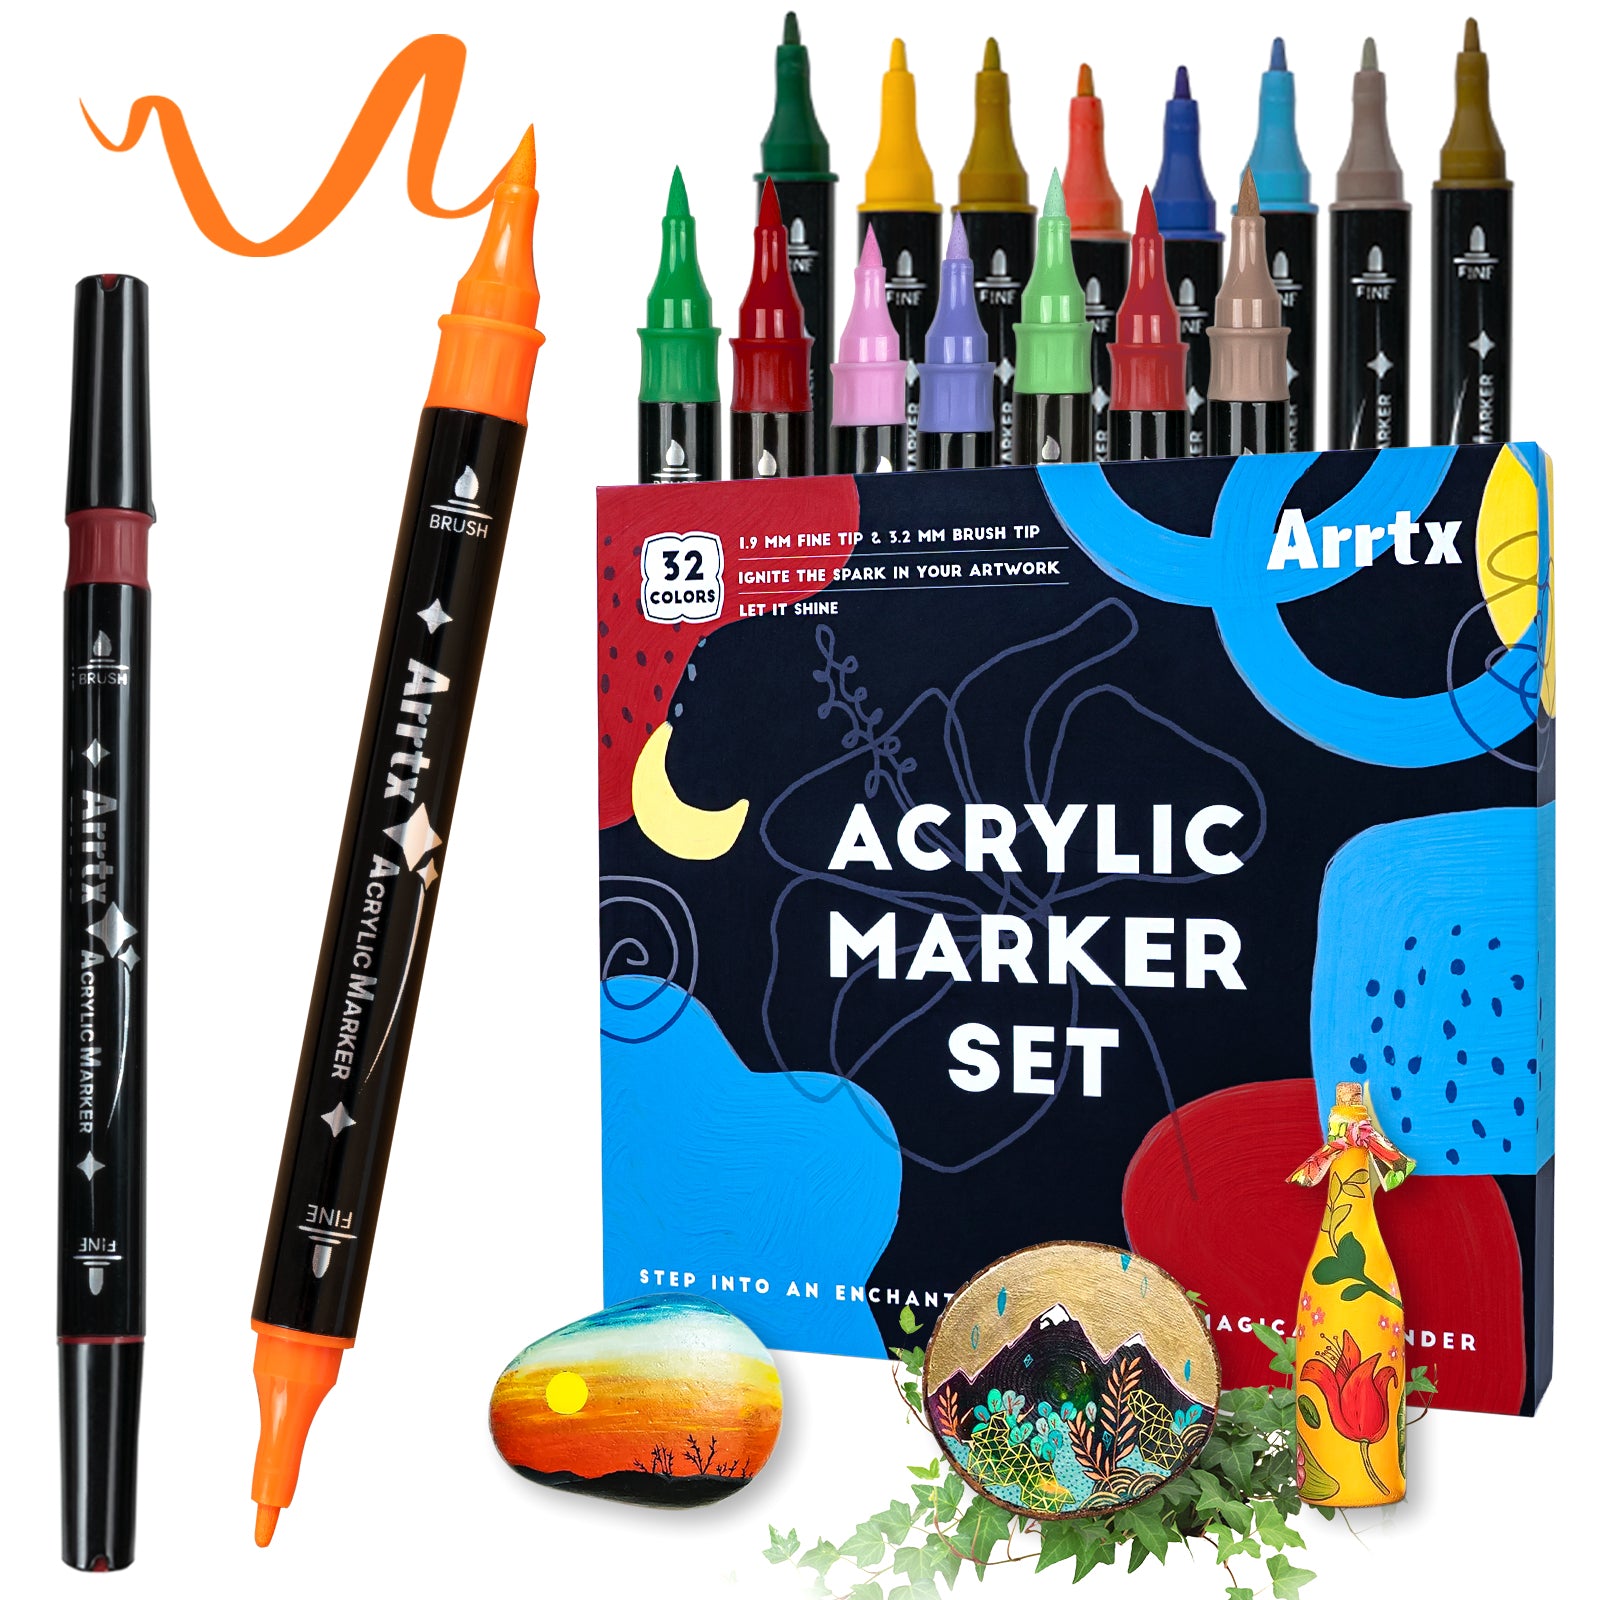 ARRTX Acrylic Markers Review  Metallic and Saturated Sets 